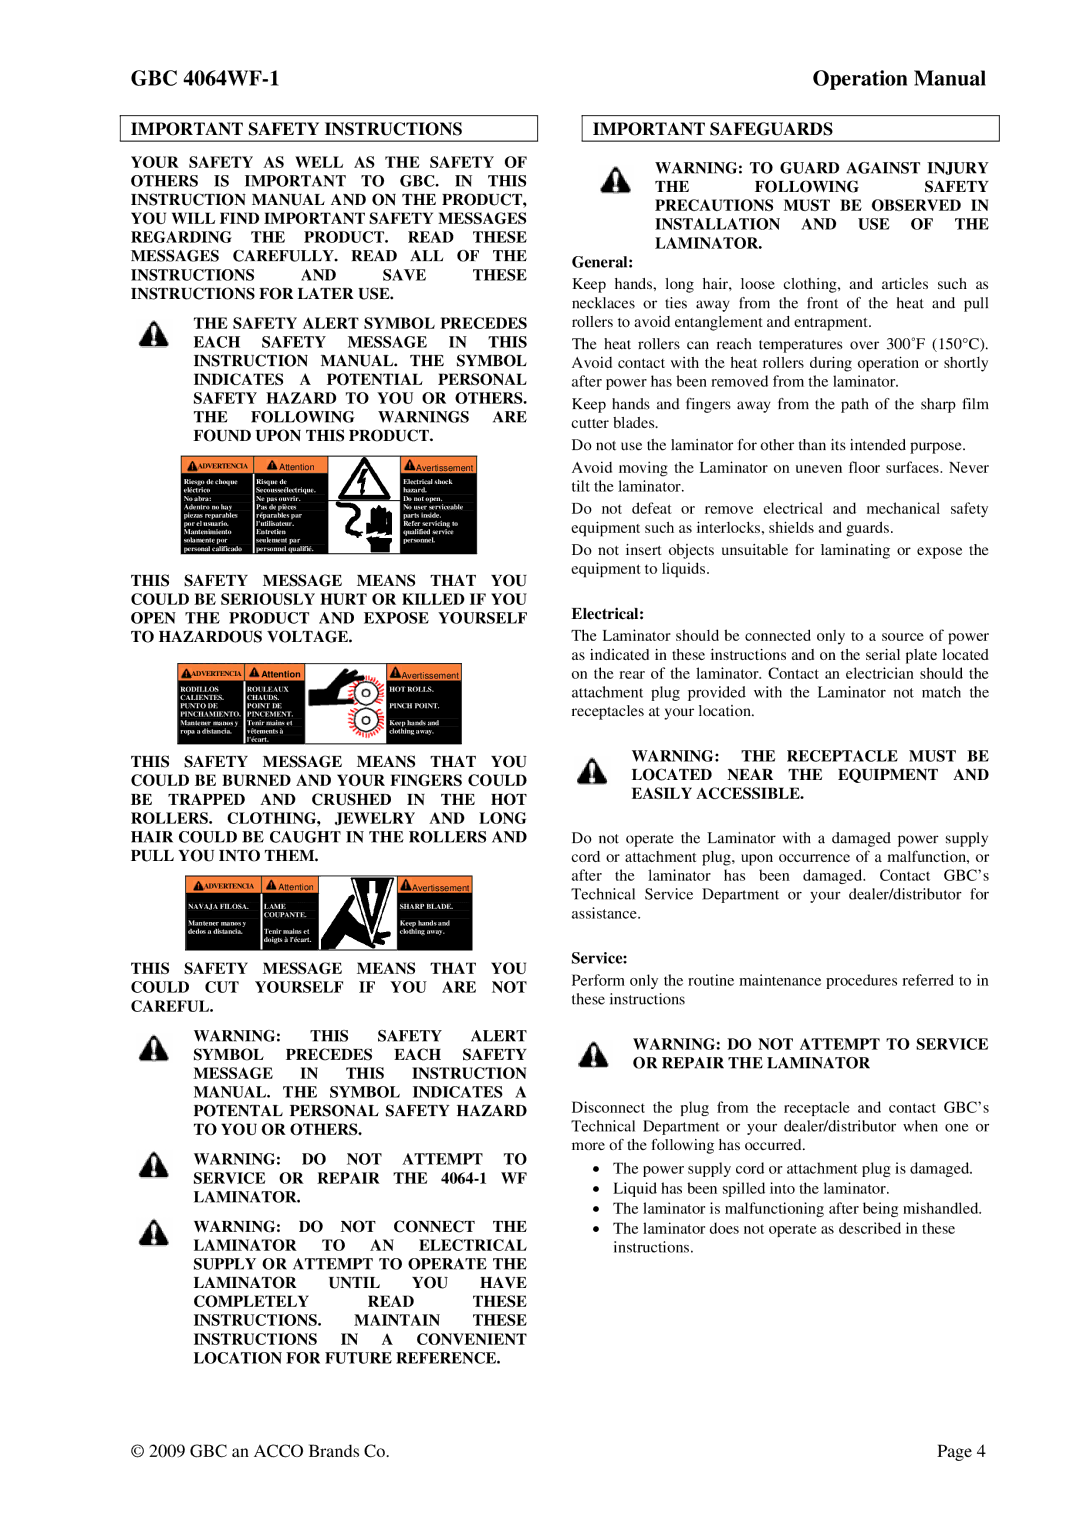 GBC 4064WF-1 operation manual Important Safety Instructions, Important Safeguards, General, Electrical, Service 